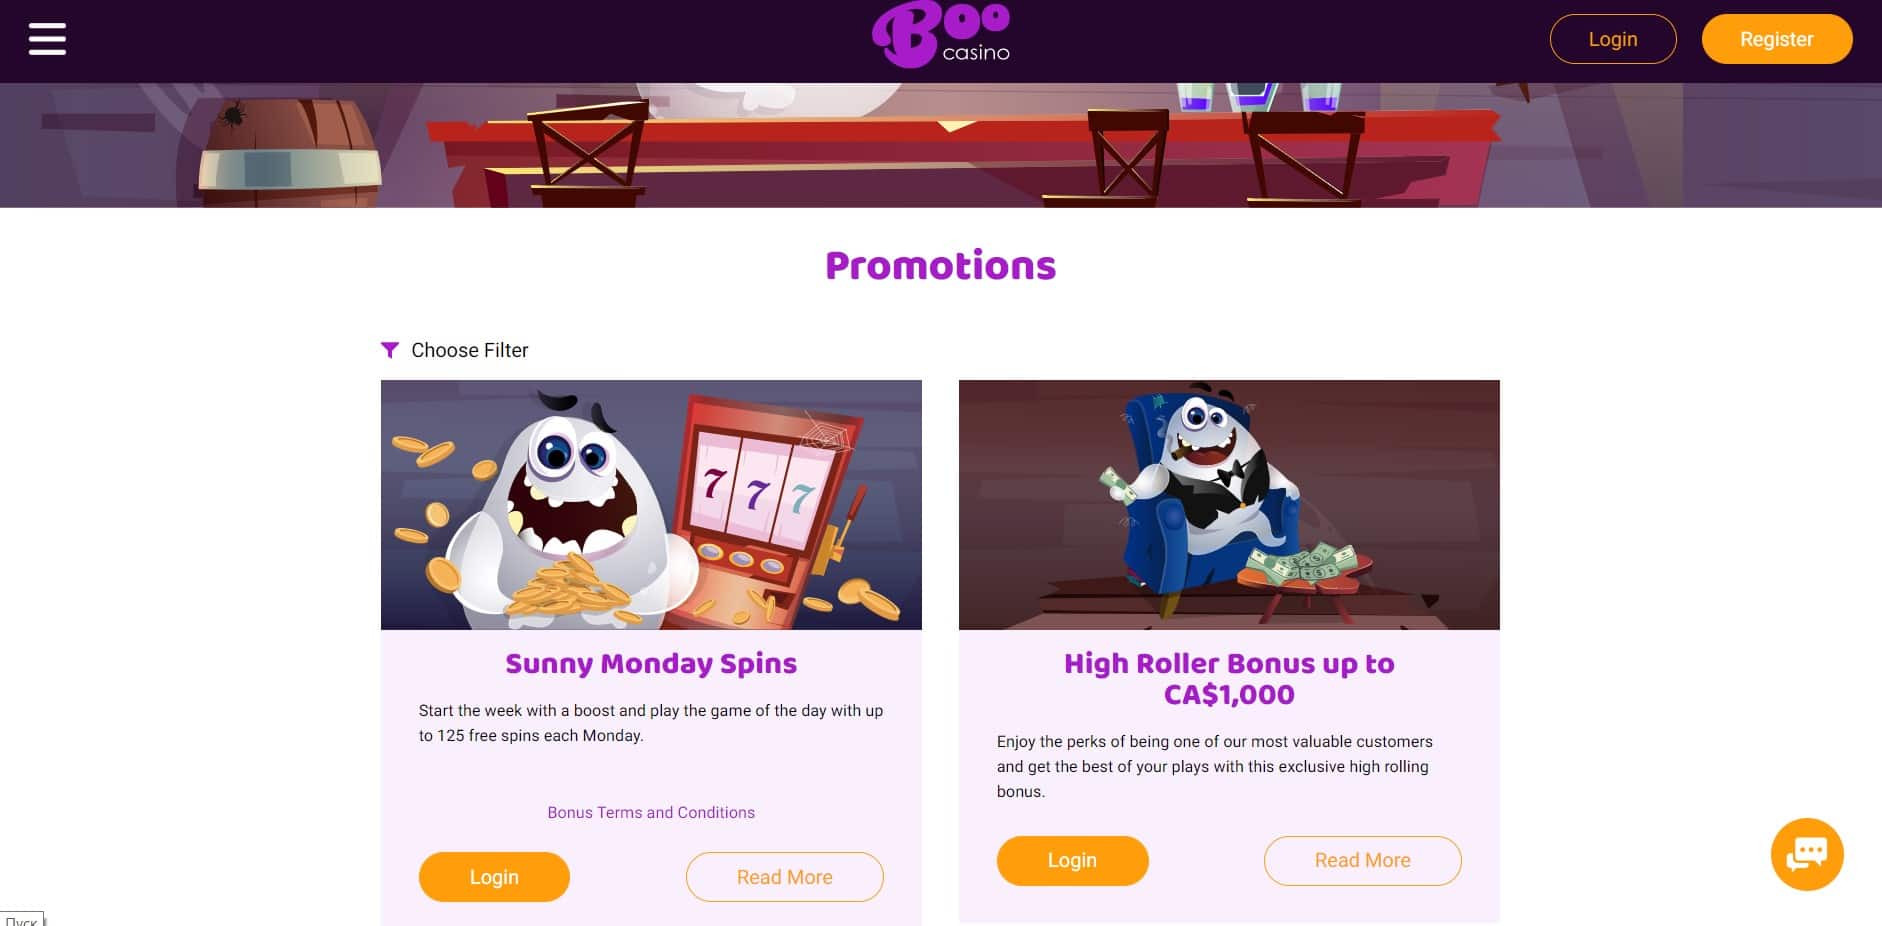 Boo Casino Promotions